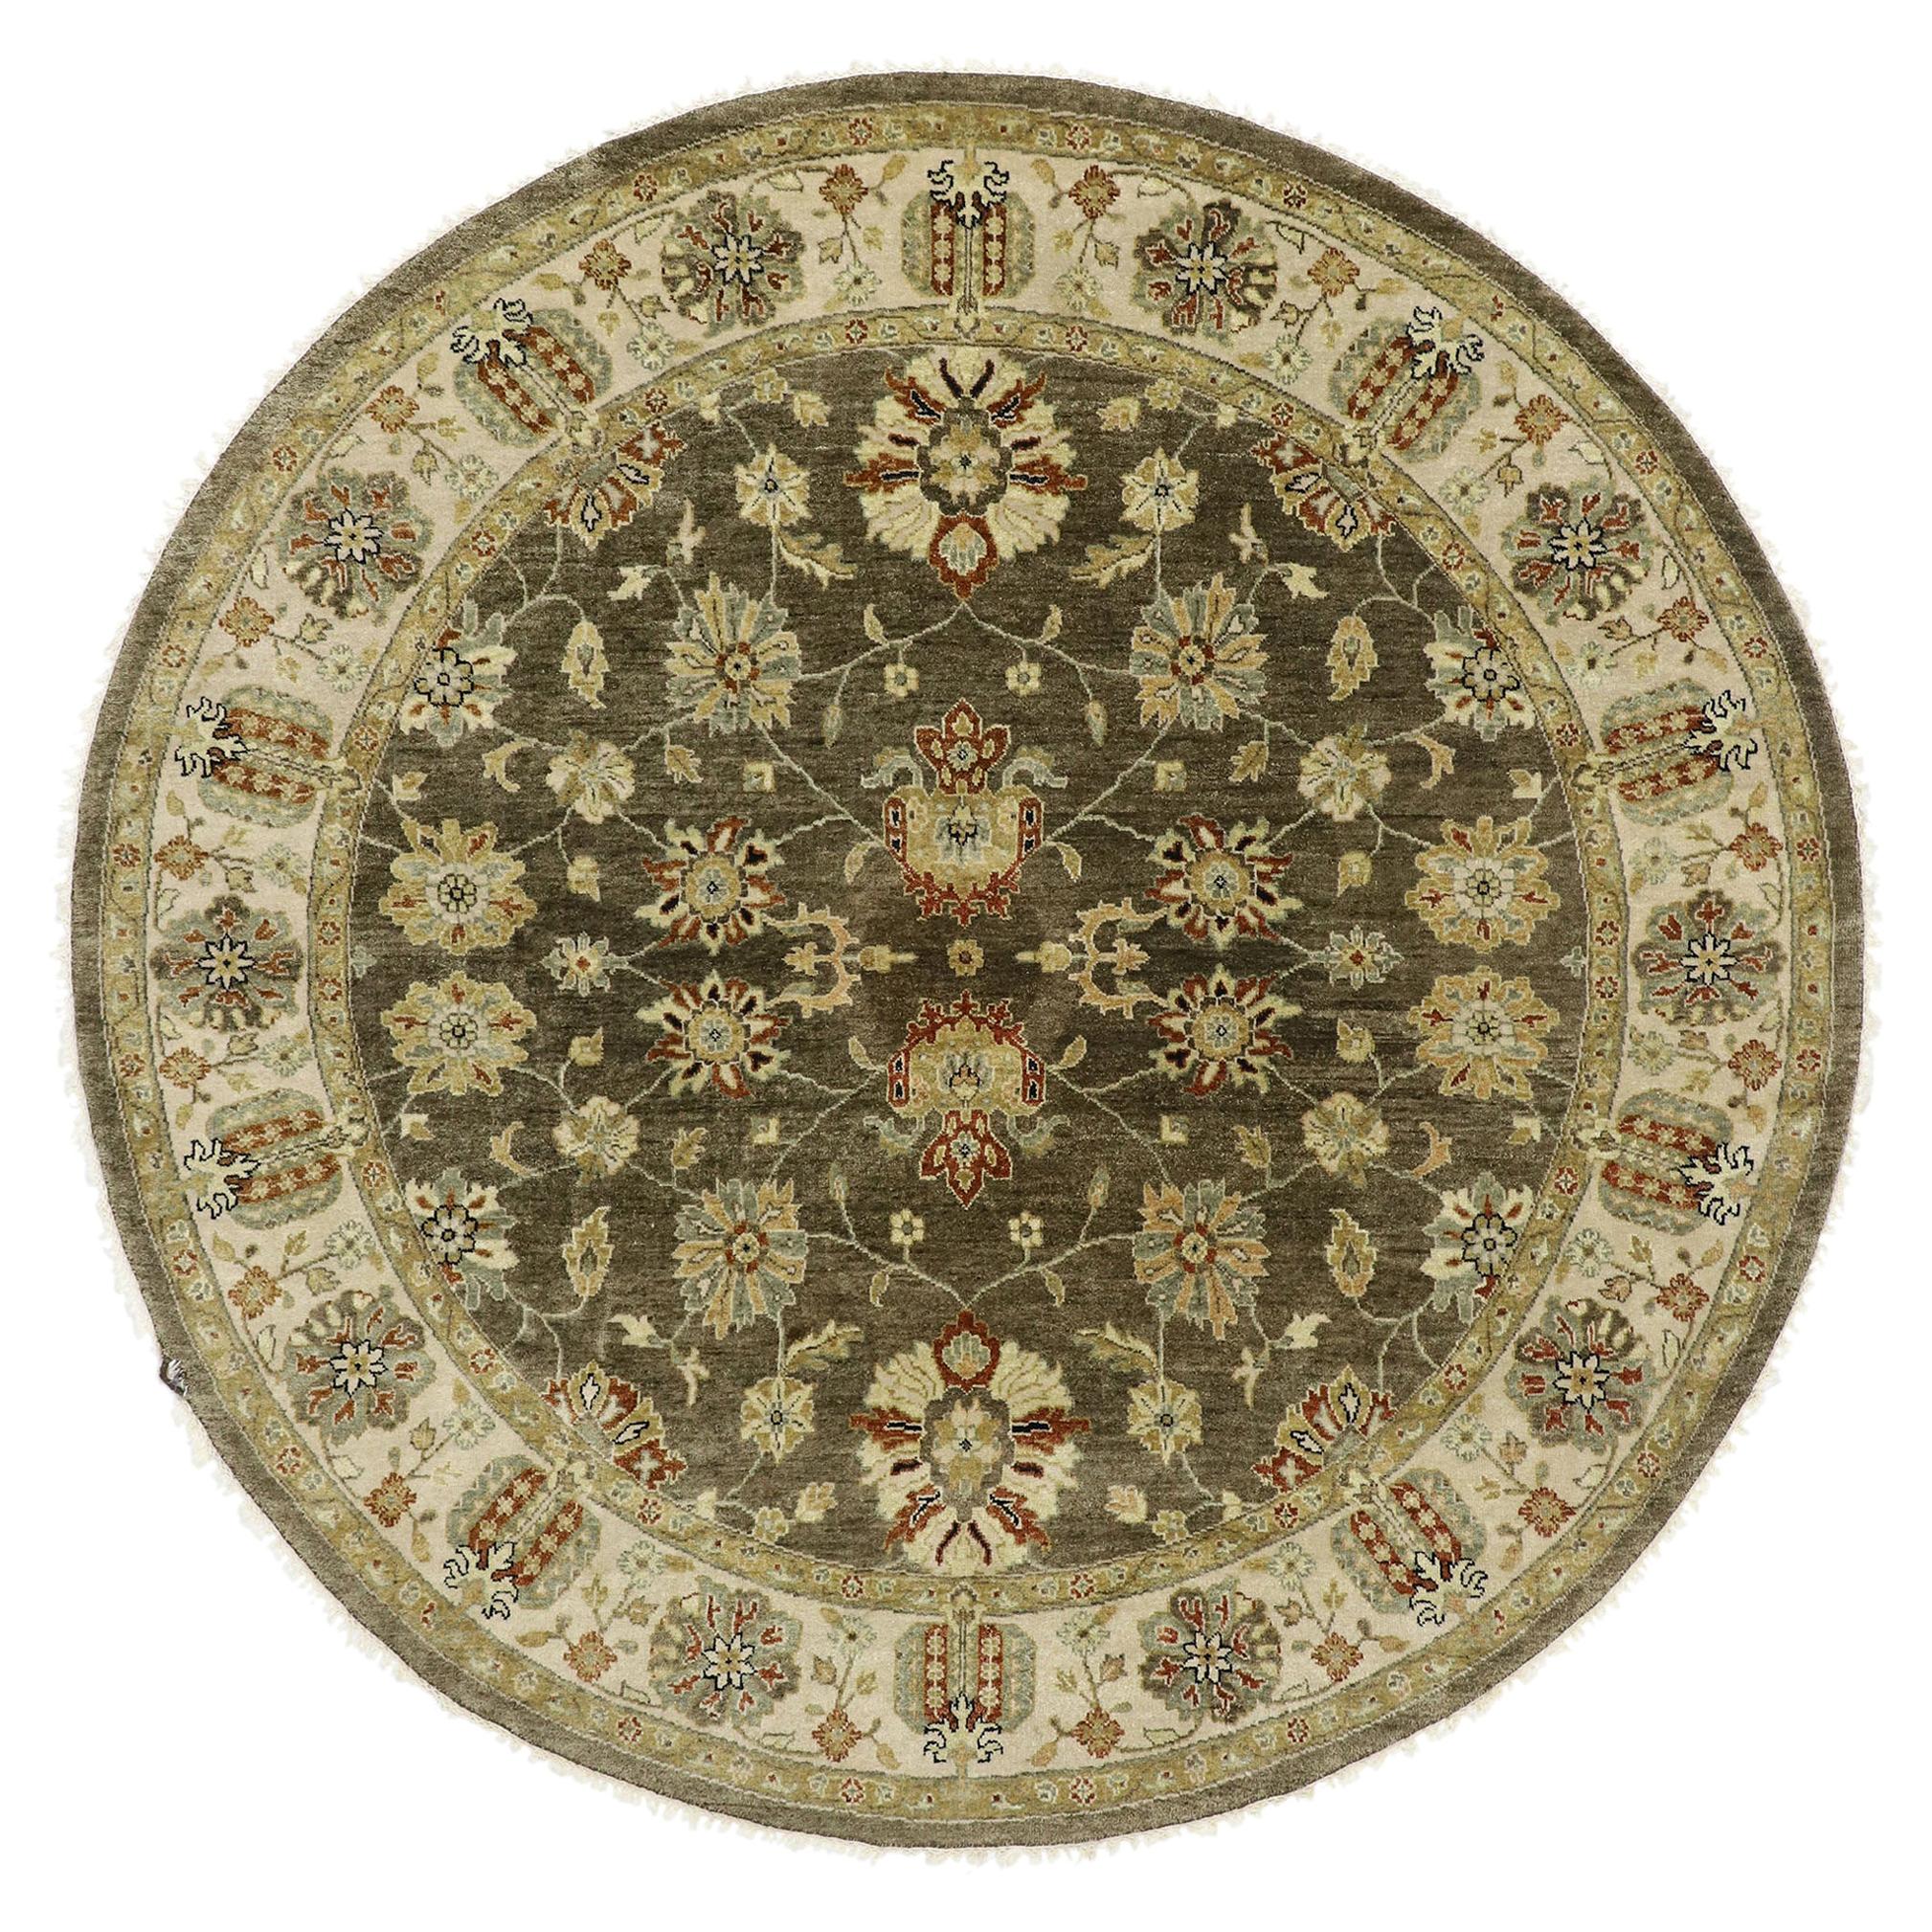 Vintage Indian Round Area Rug, Circular Rug with Arts and Crafts Style